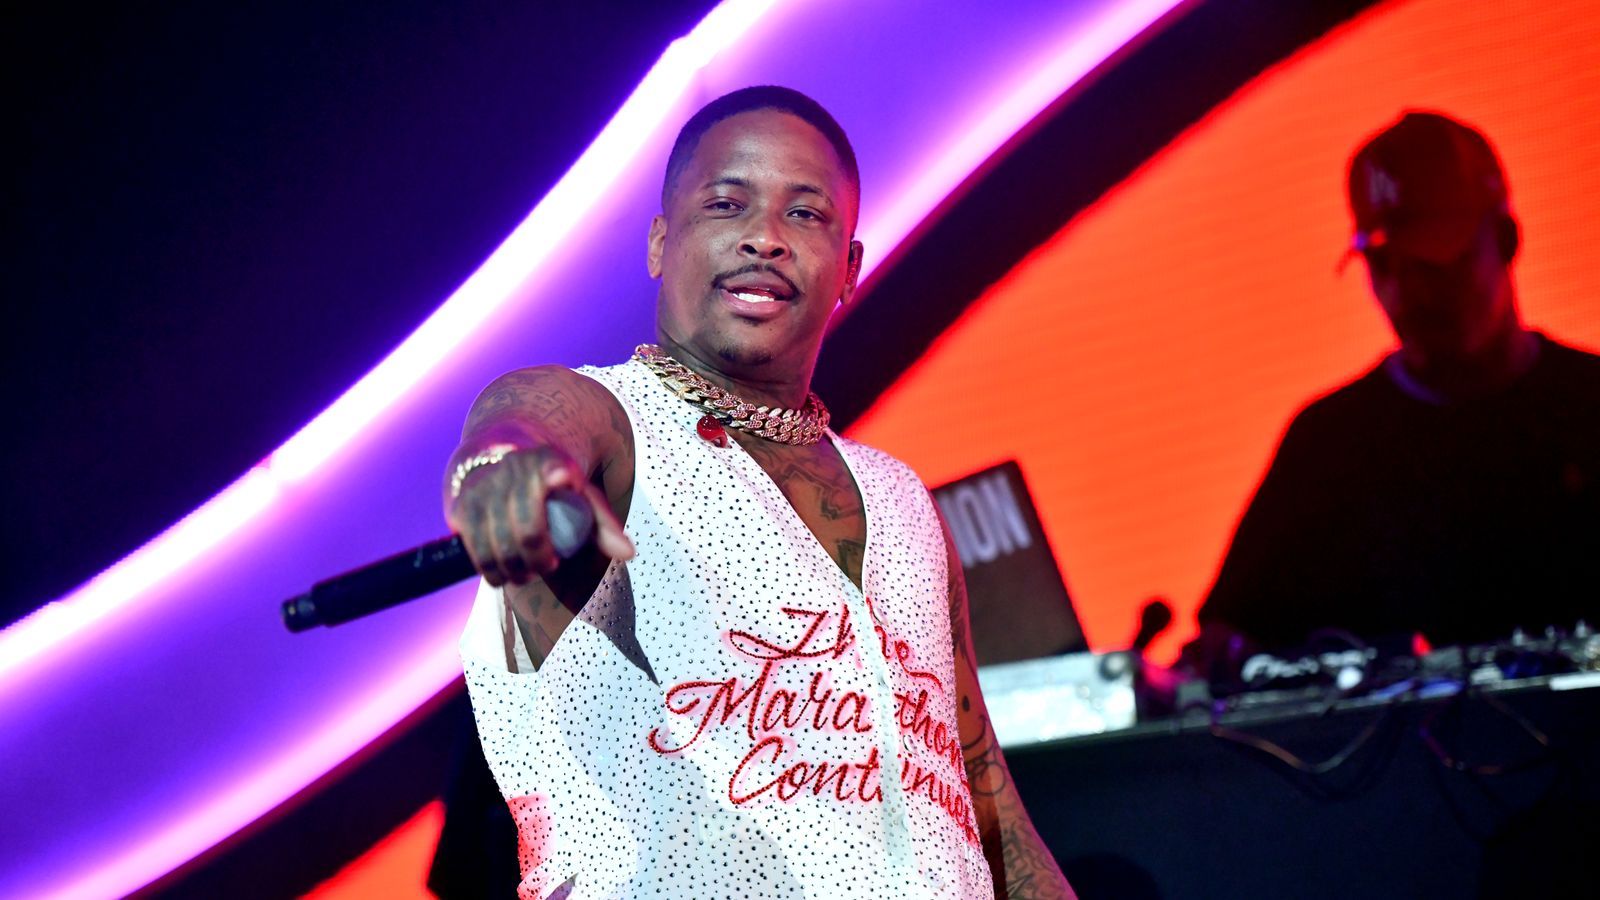 Rapper YG arrested on suspicion of robbery ahead of Grammys